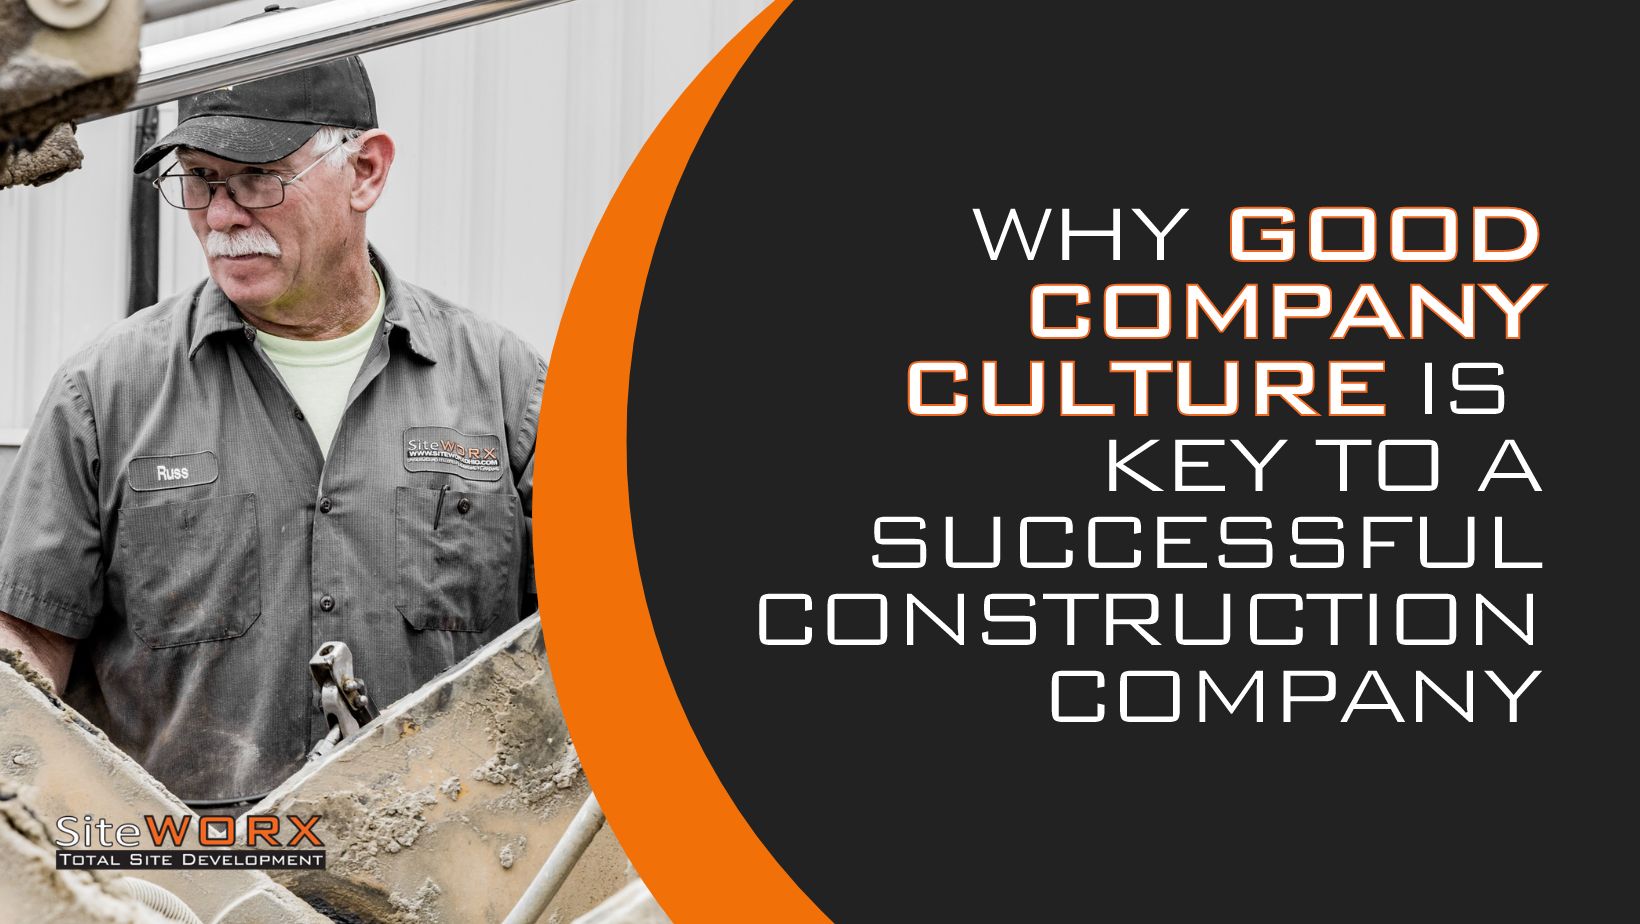 Why Good Company Culture is Key to a Successful Construction Company 